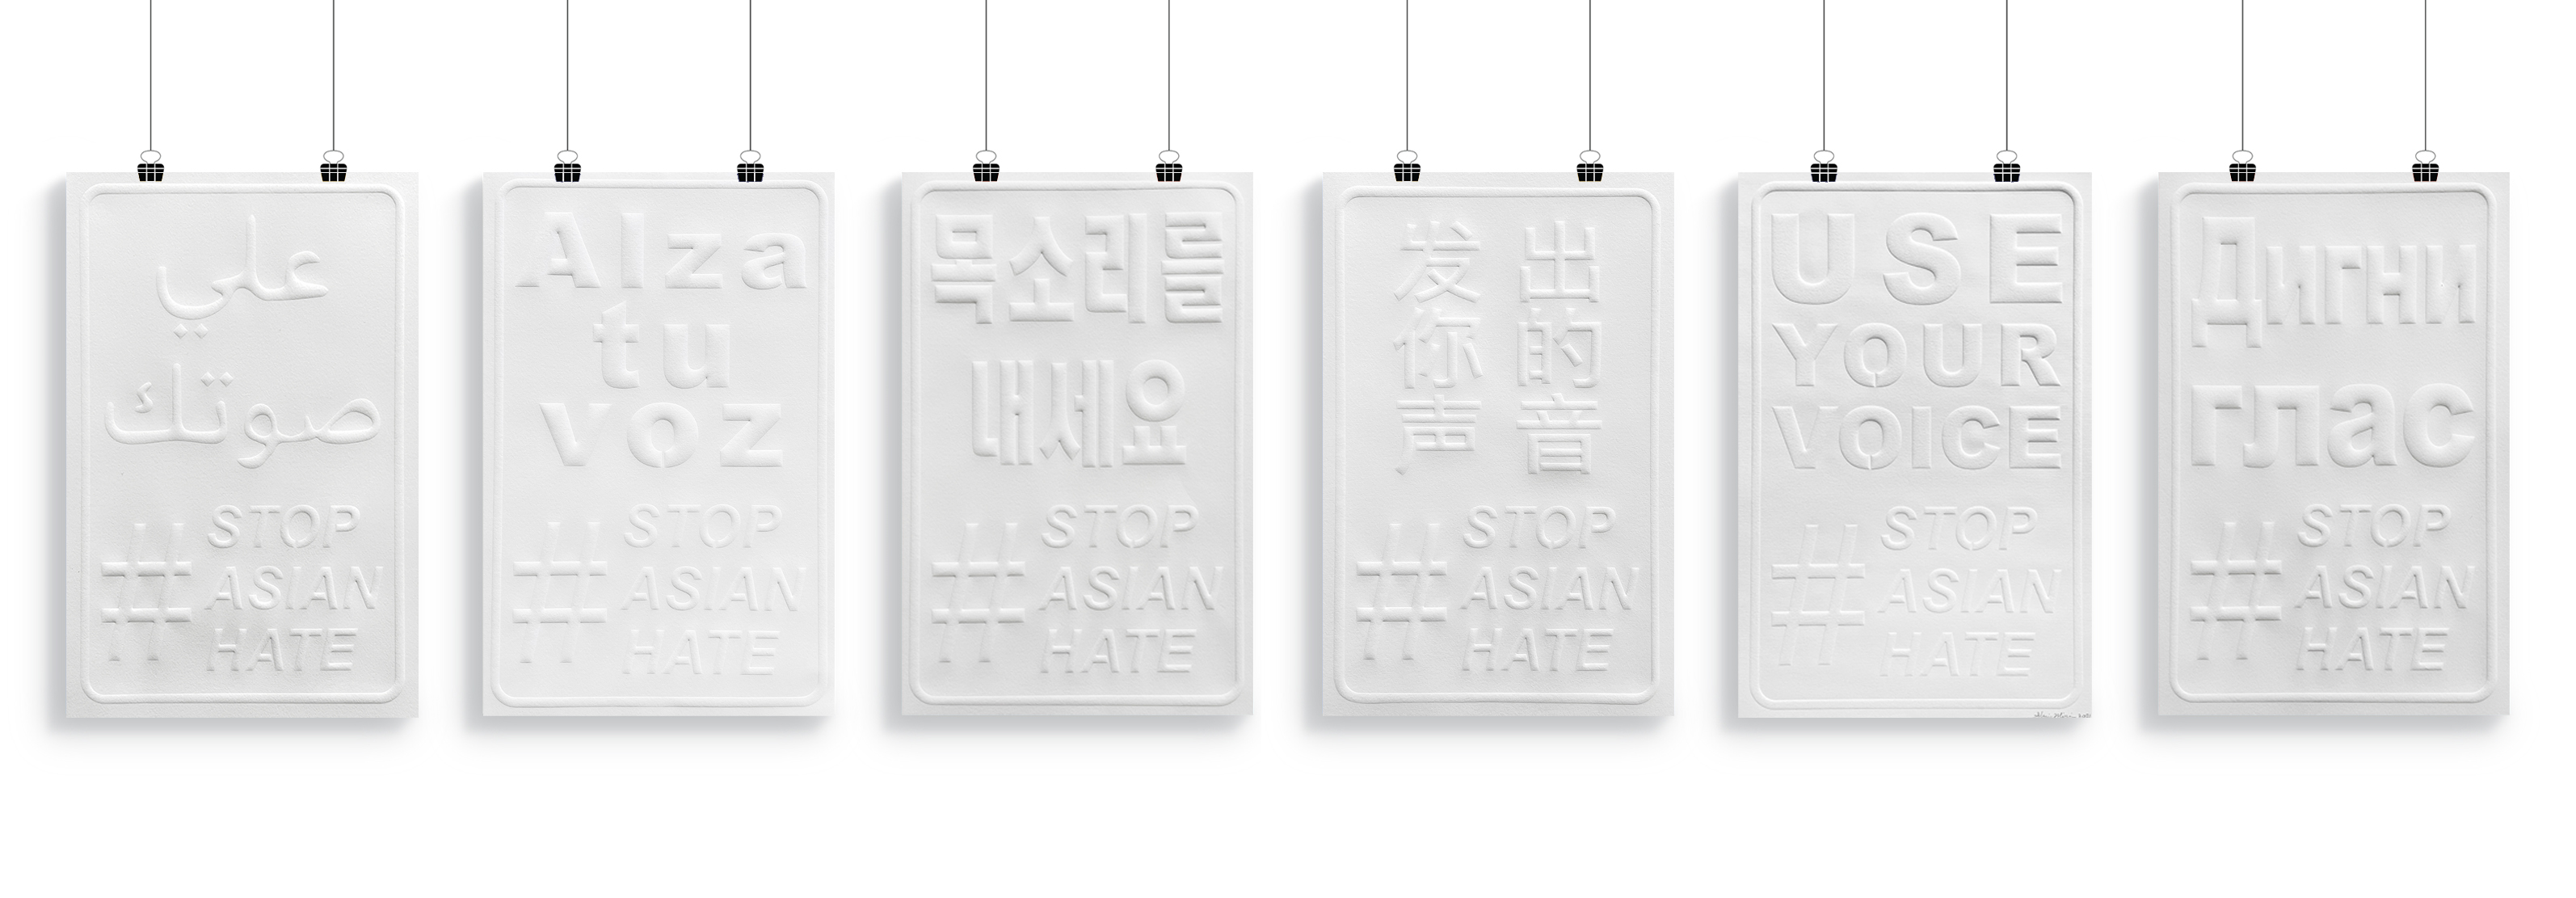 Six embossed prints of "Use Your Voice #StopAsianHate" in various languages